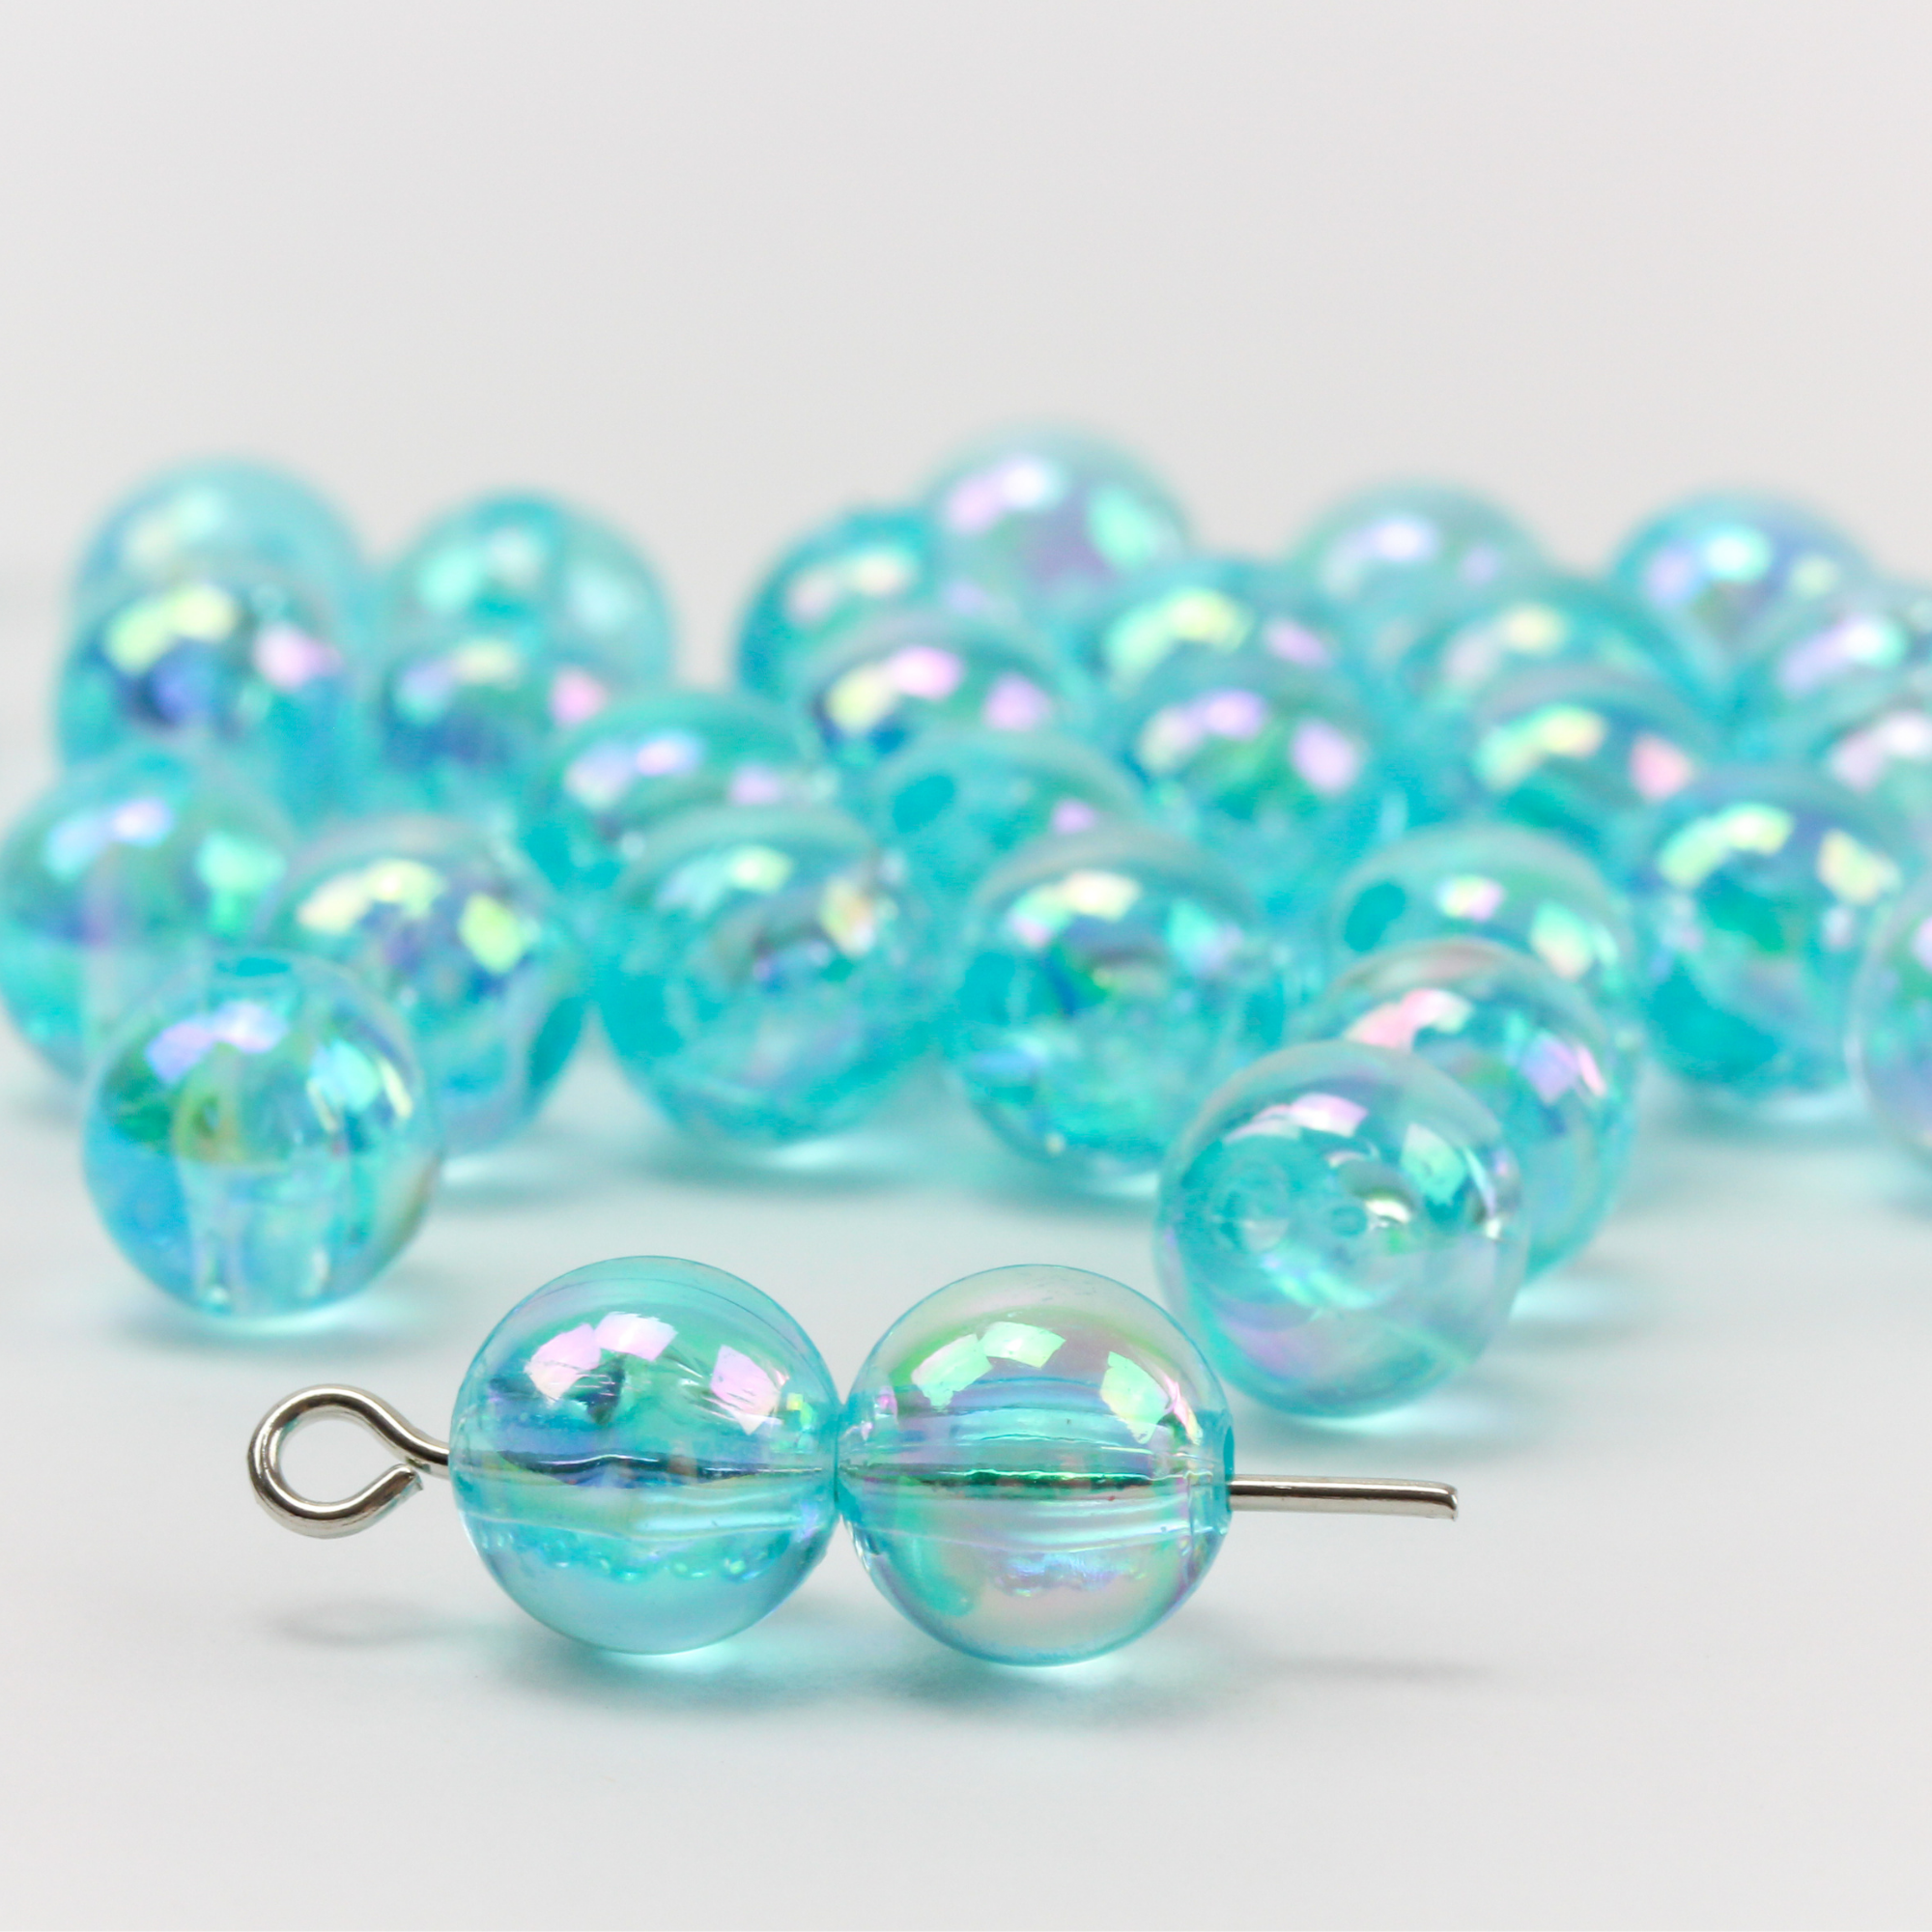 8mm Faceted Glass Beads Blue, Glass Jewelry Accessories